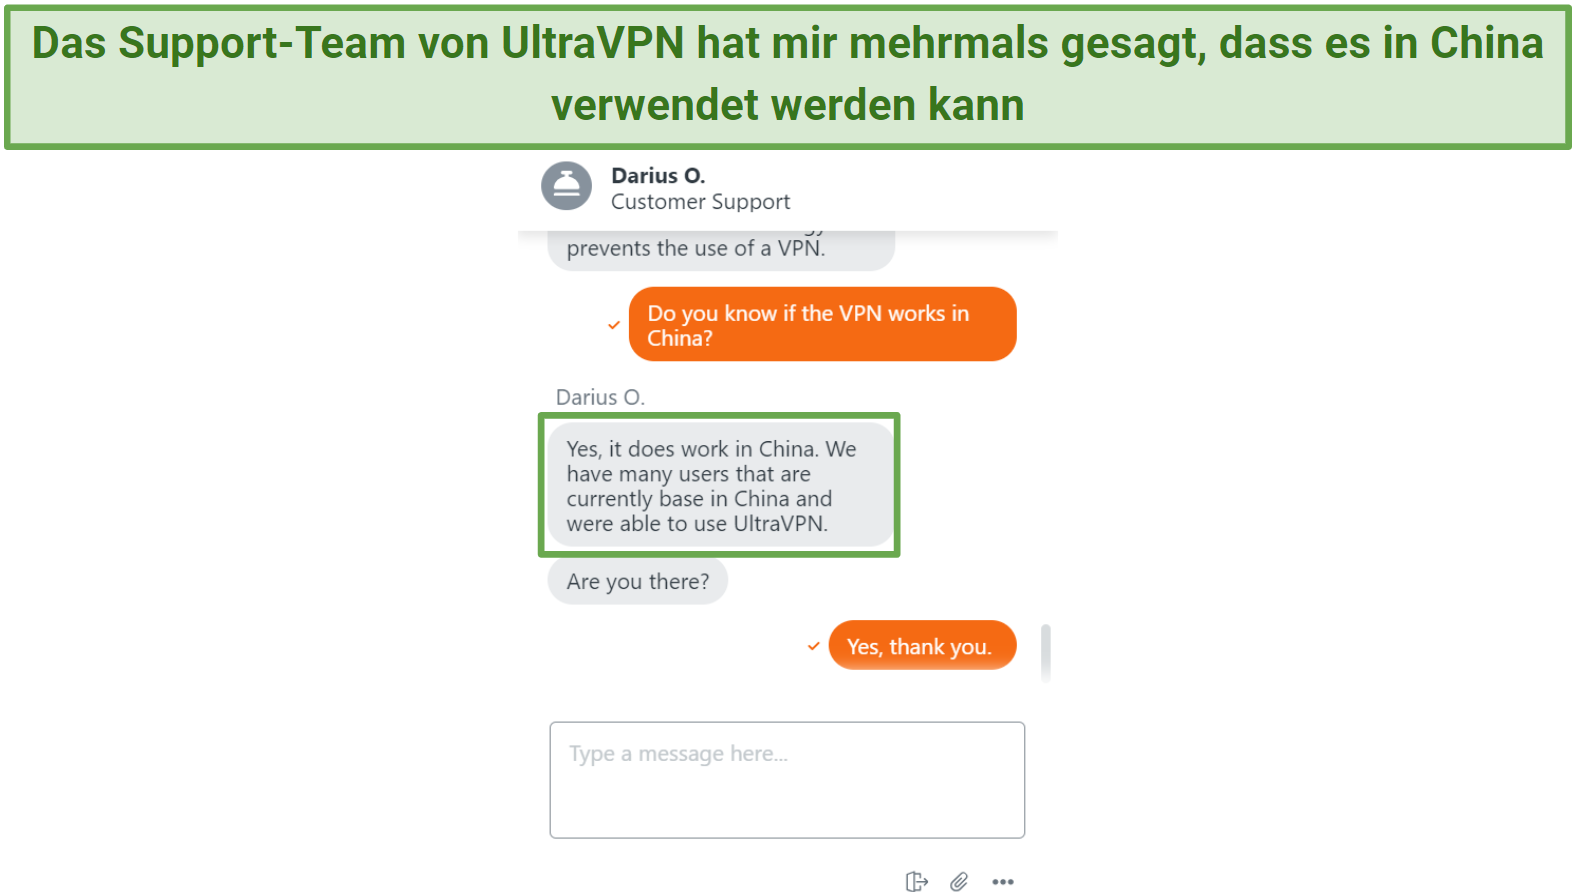 Screenshot of a live chat with UltraVPN where they stated the VPN works in China